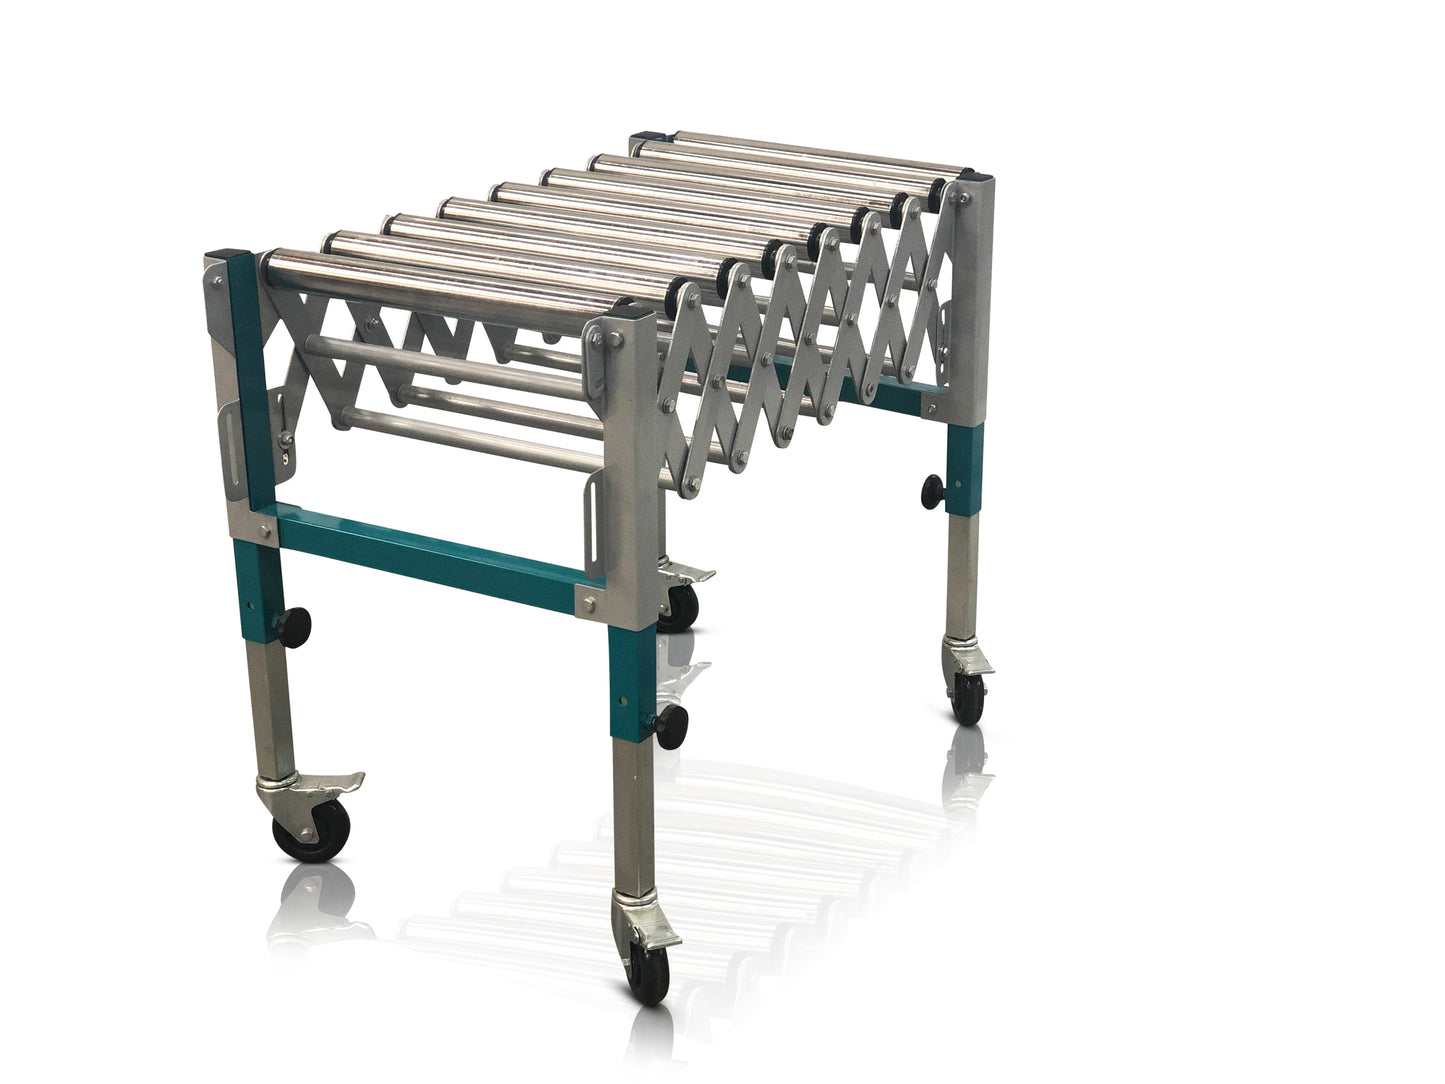 ADJUSTABLE EXPANDING ROLLER TABLE